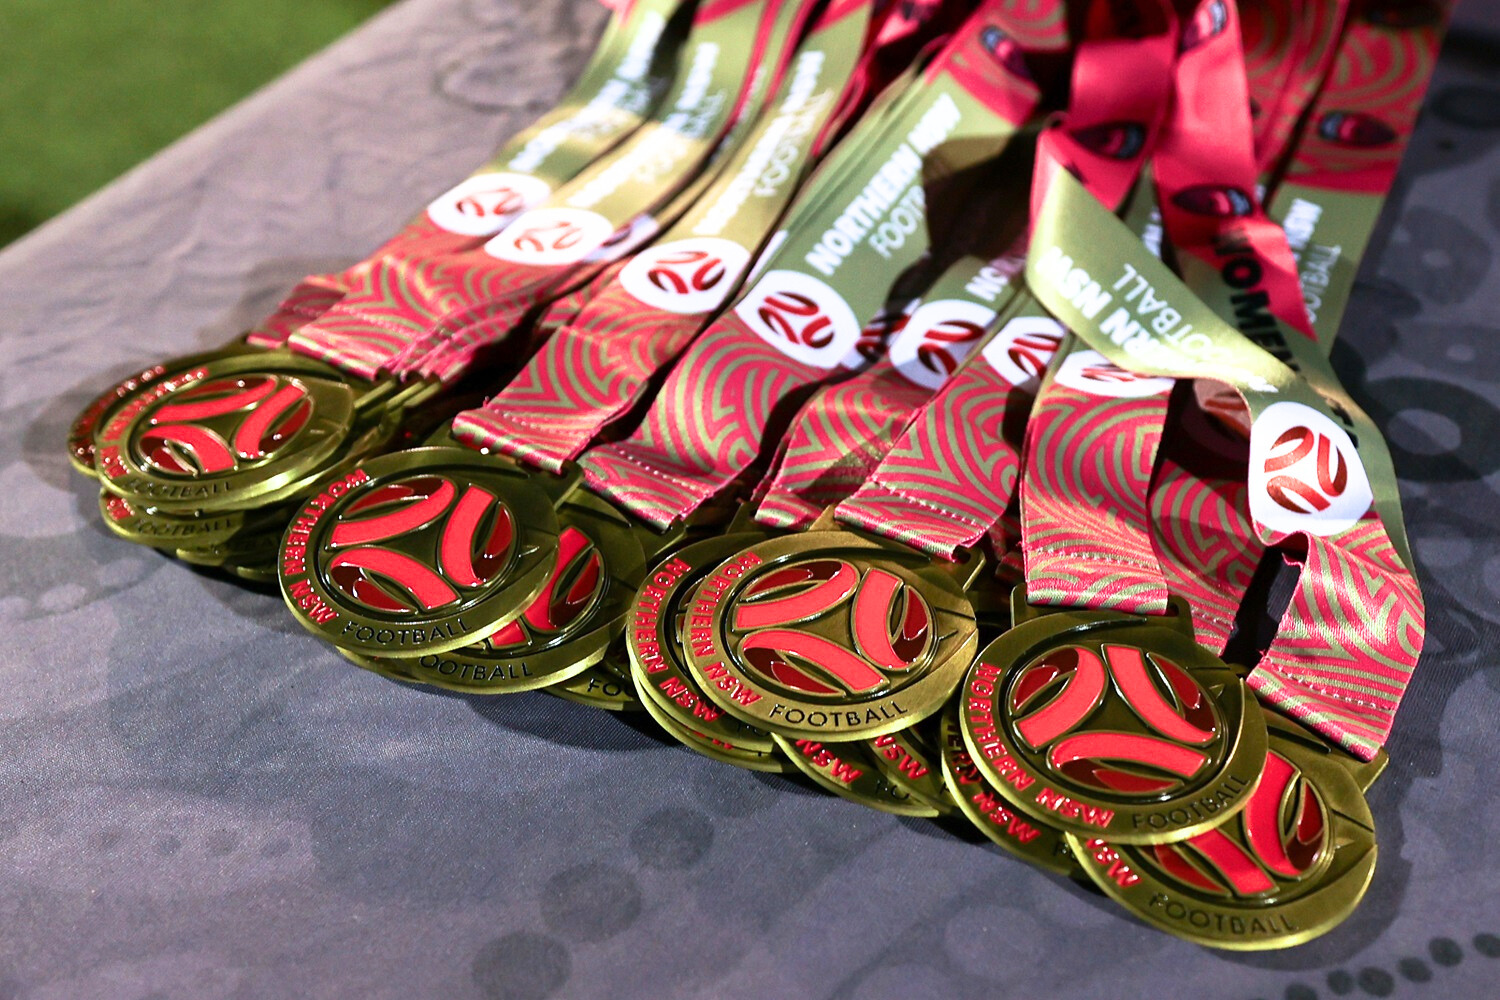 Northern NSW Football Case Study: Custom Medals Turn ‘Off The Shelf’ Into ‘Statement Pieces’